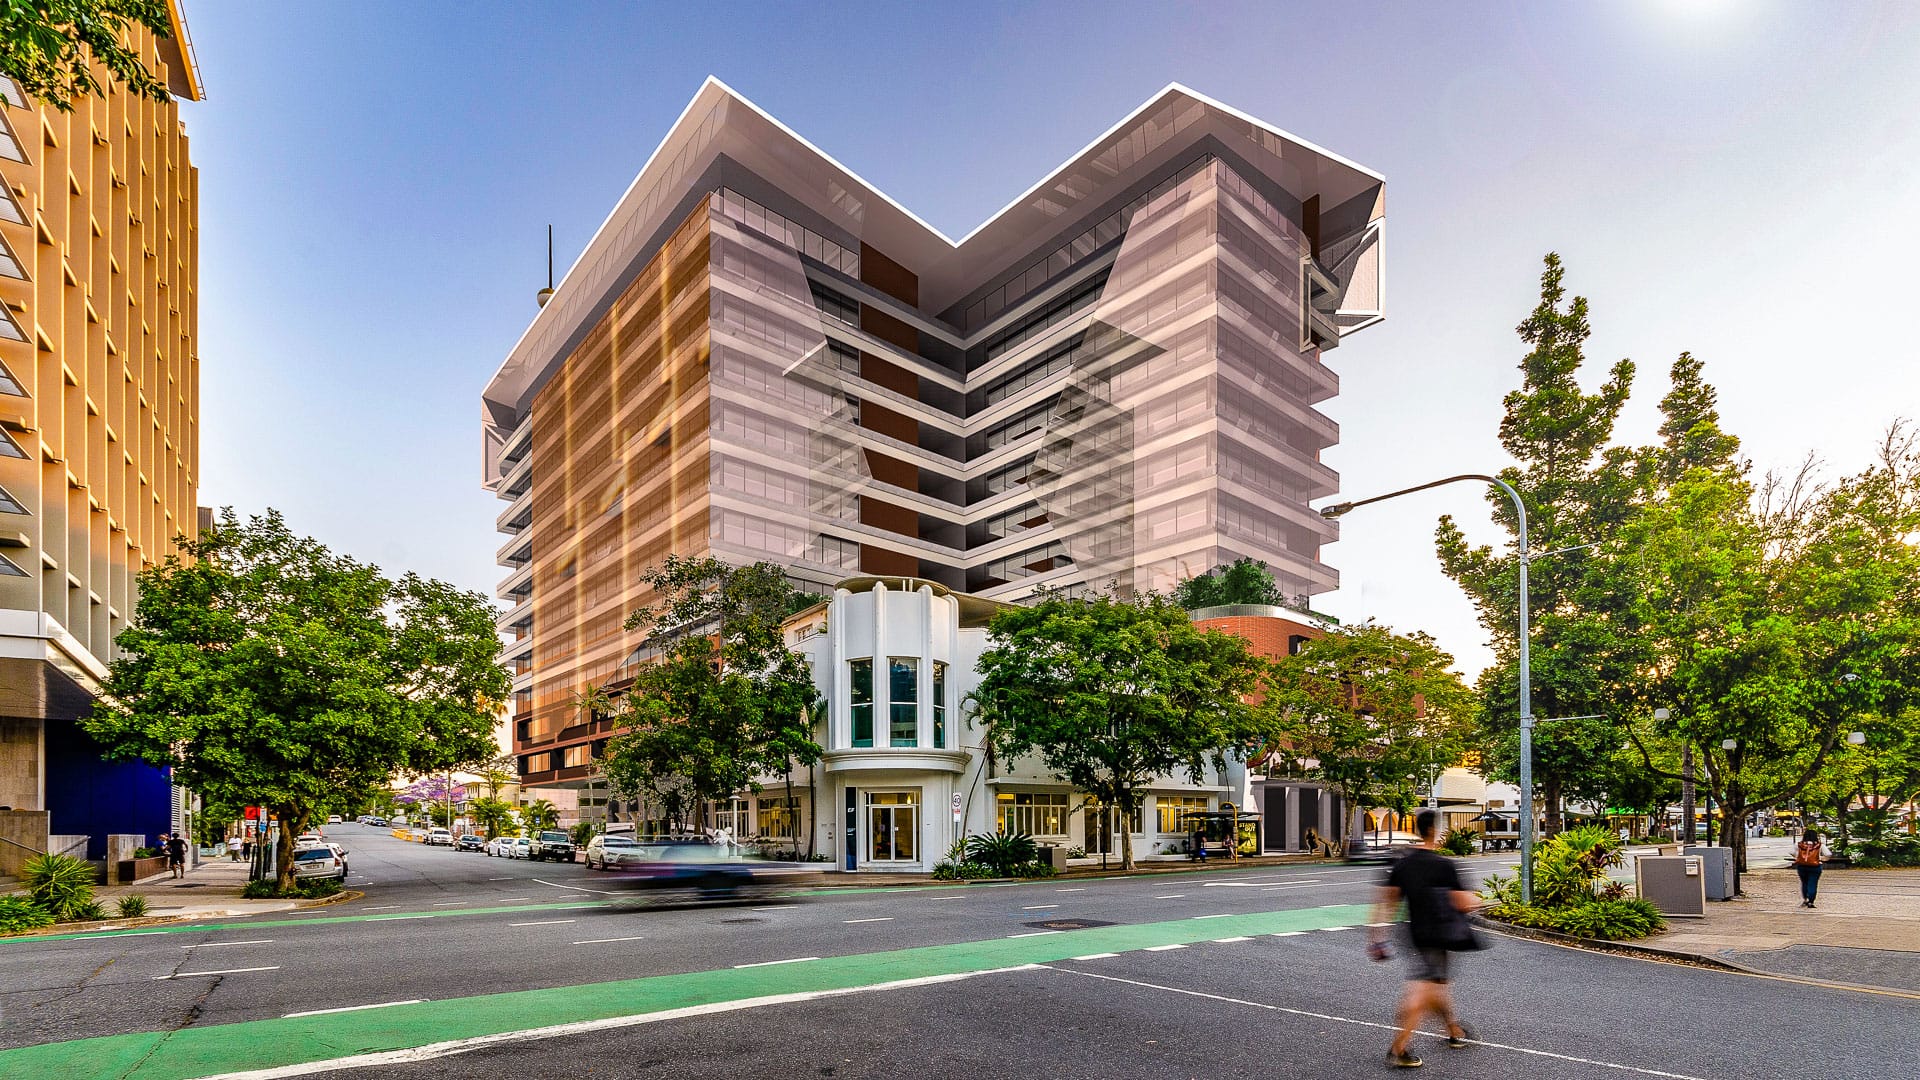 South Brisbane Mixed Use by 77 Architecture. Copyright of 77 Architecture. Streetview of multi-level mixed-use building on street intersection. 